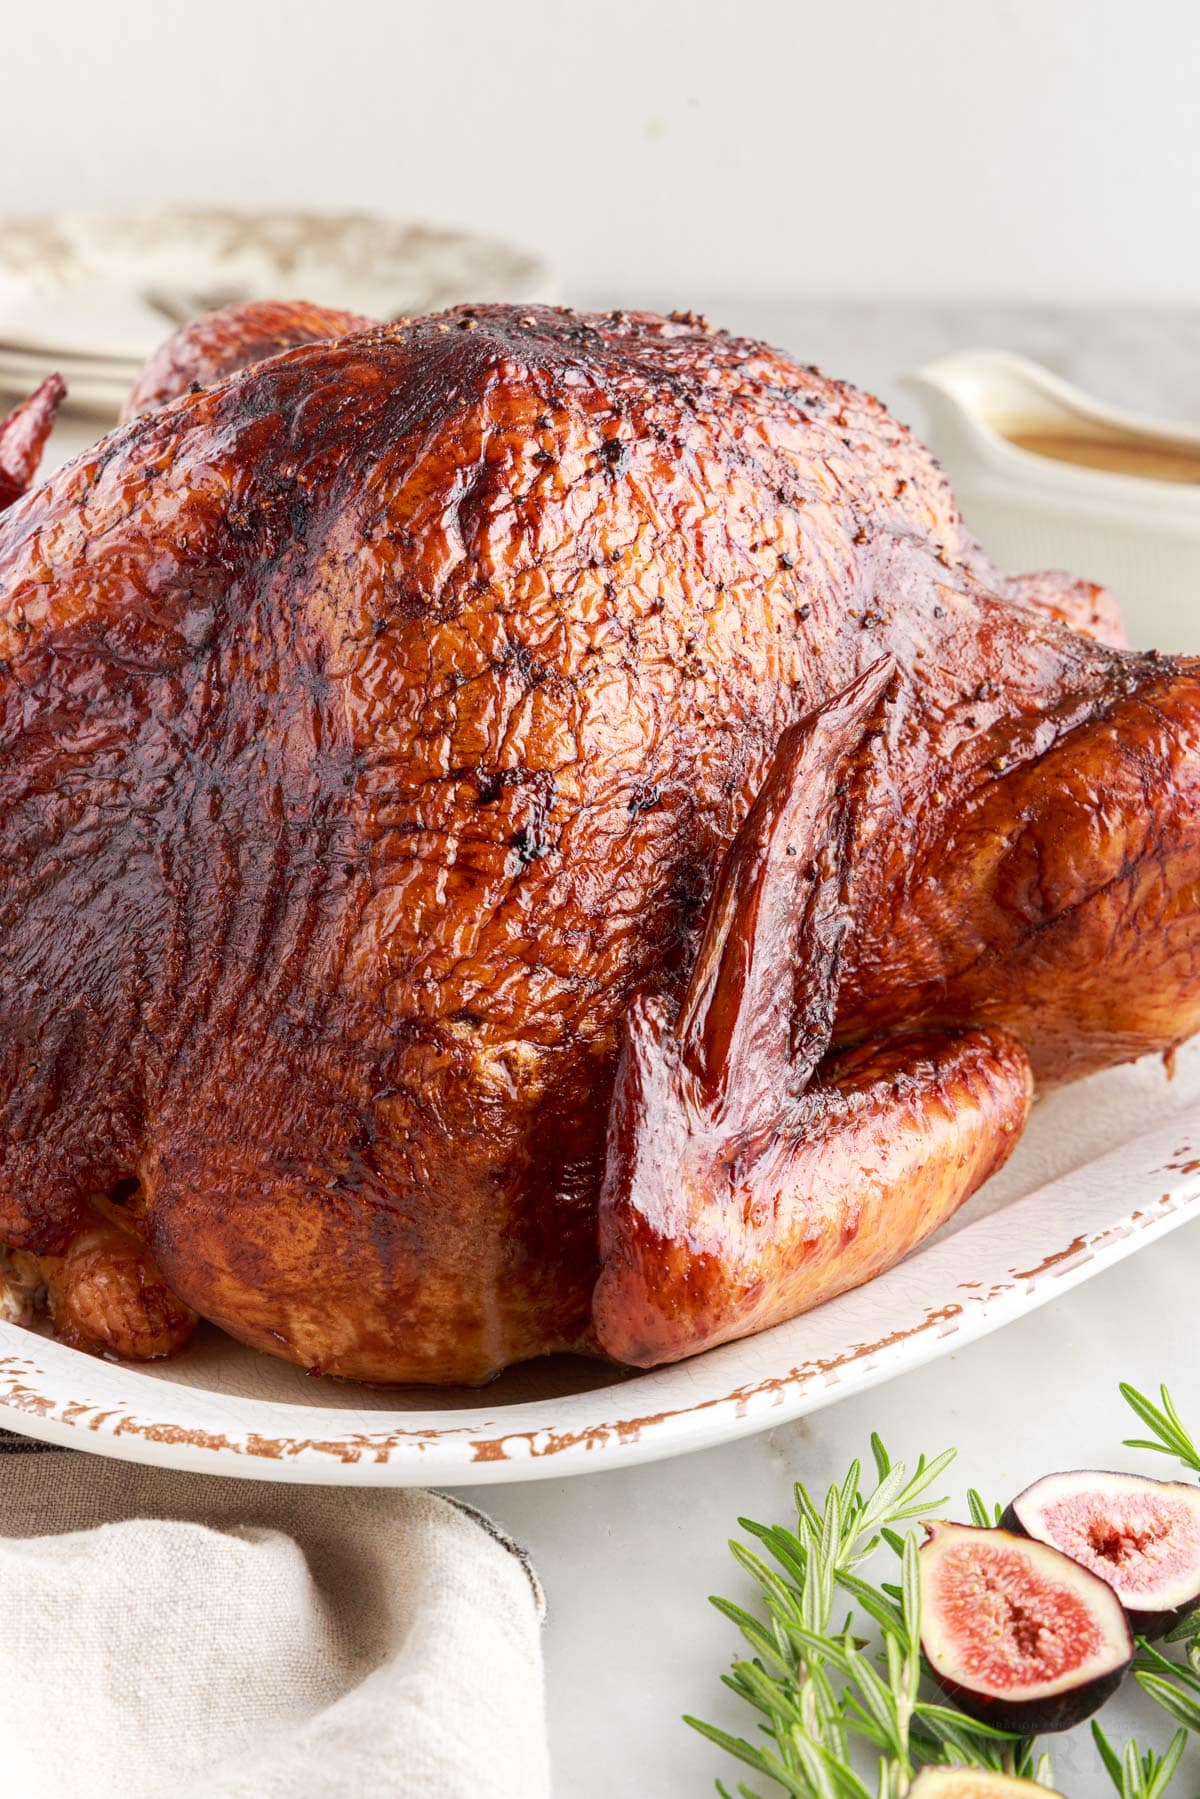 front side view of the smoked turkey on a platter